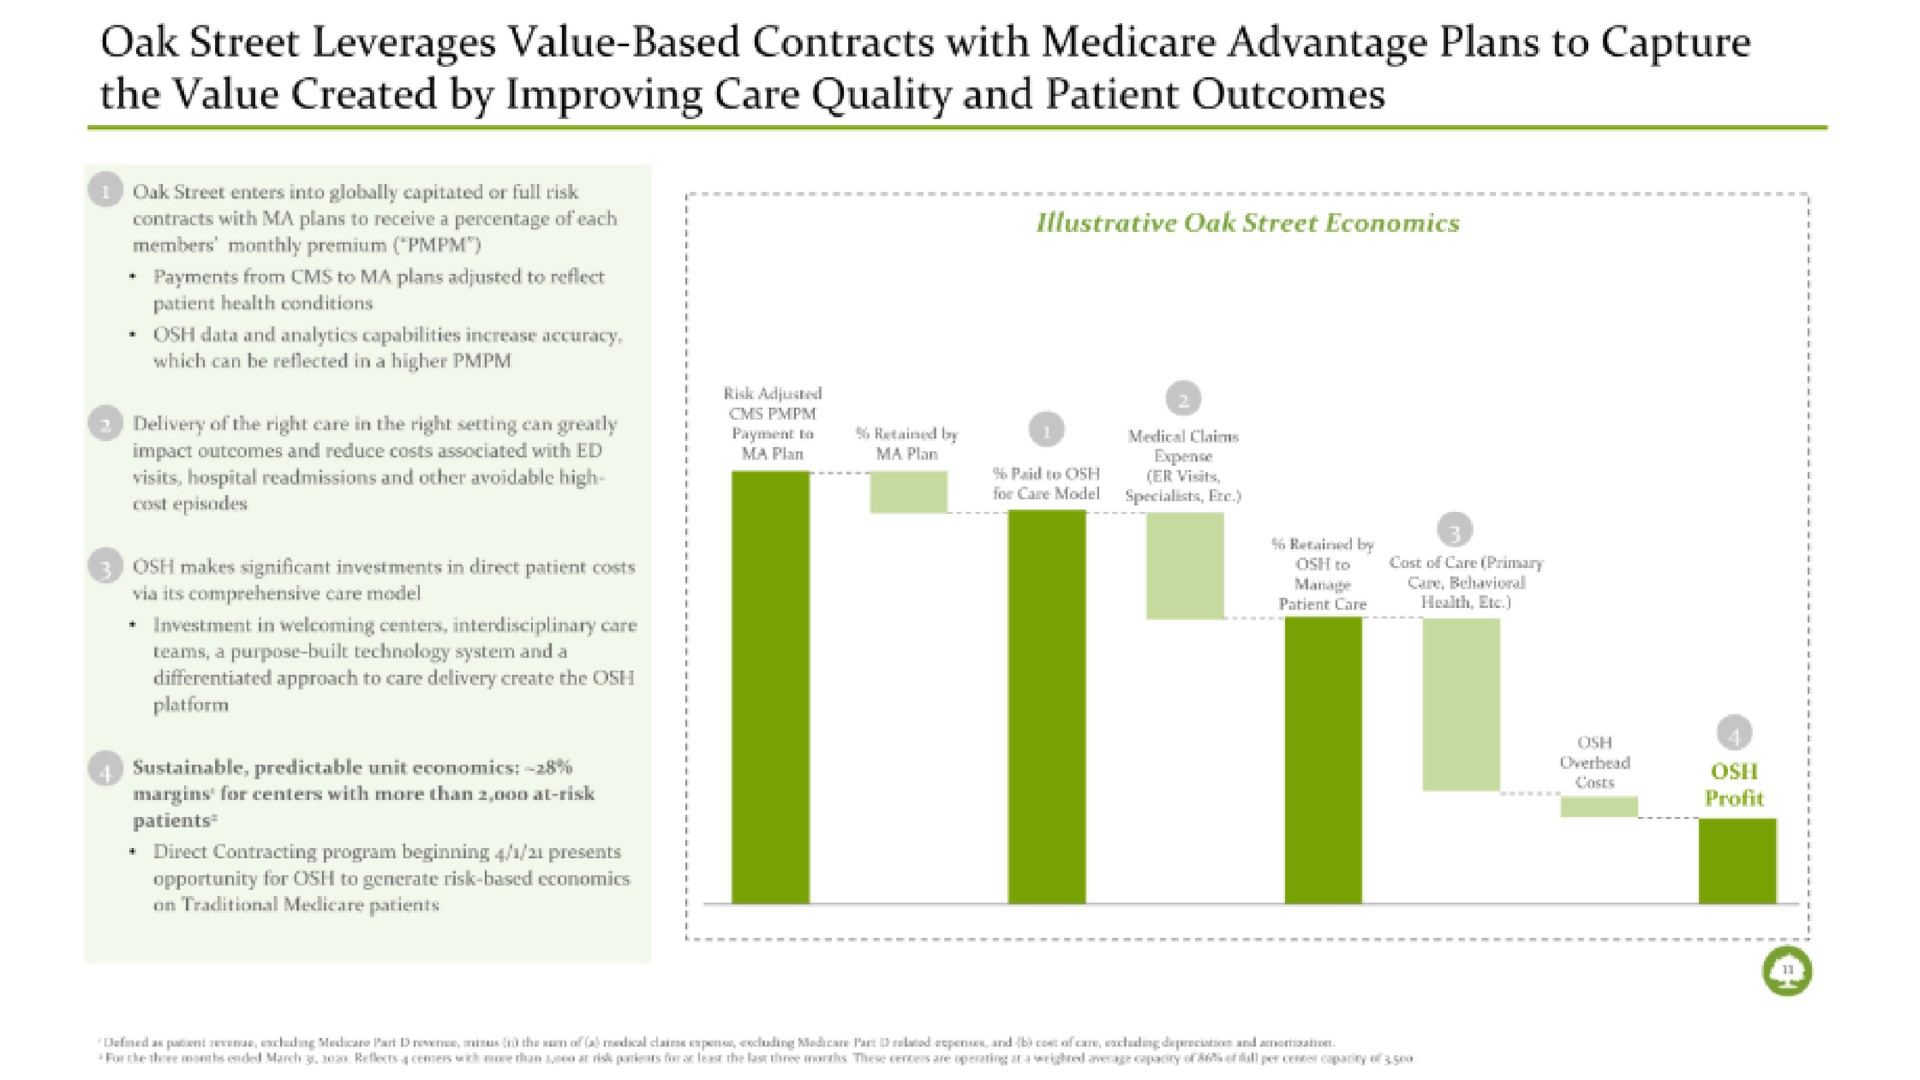 oak street leverages value based contracts with advantage plans to capture the value created by improving care quality and patient outcomes | Oak Street Health